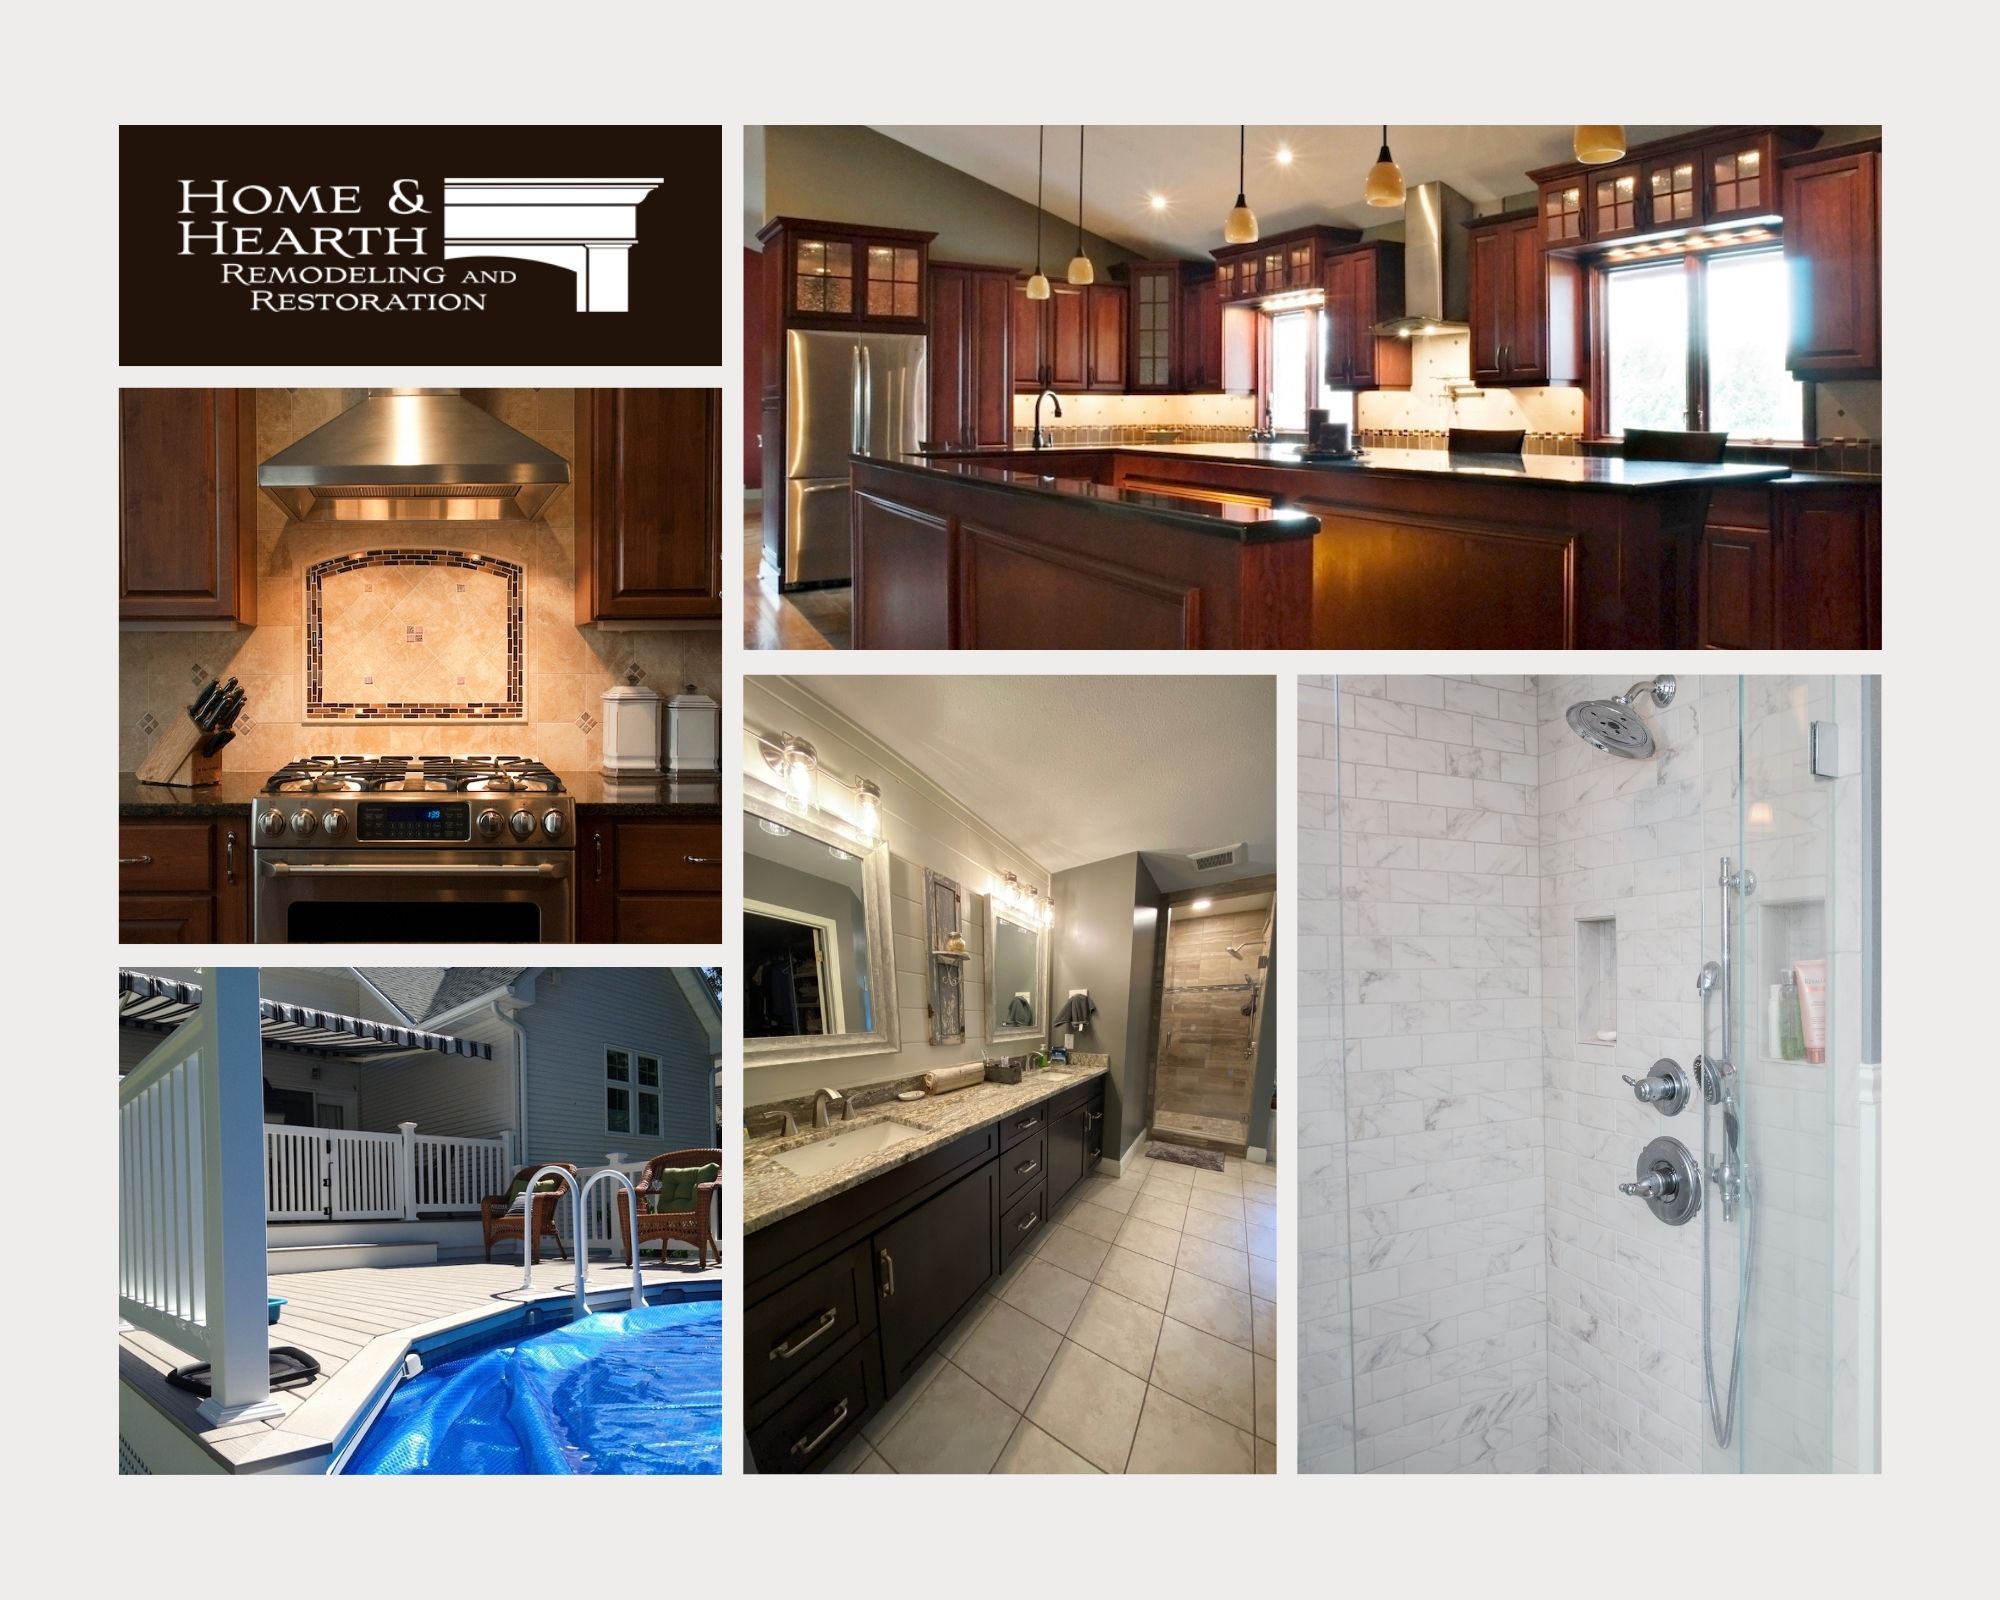 Home & Hearth Remodeling and Restoration